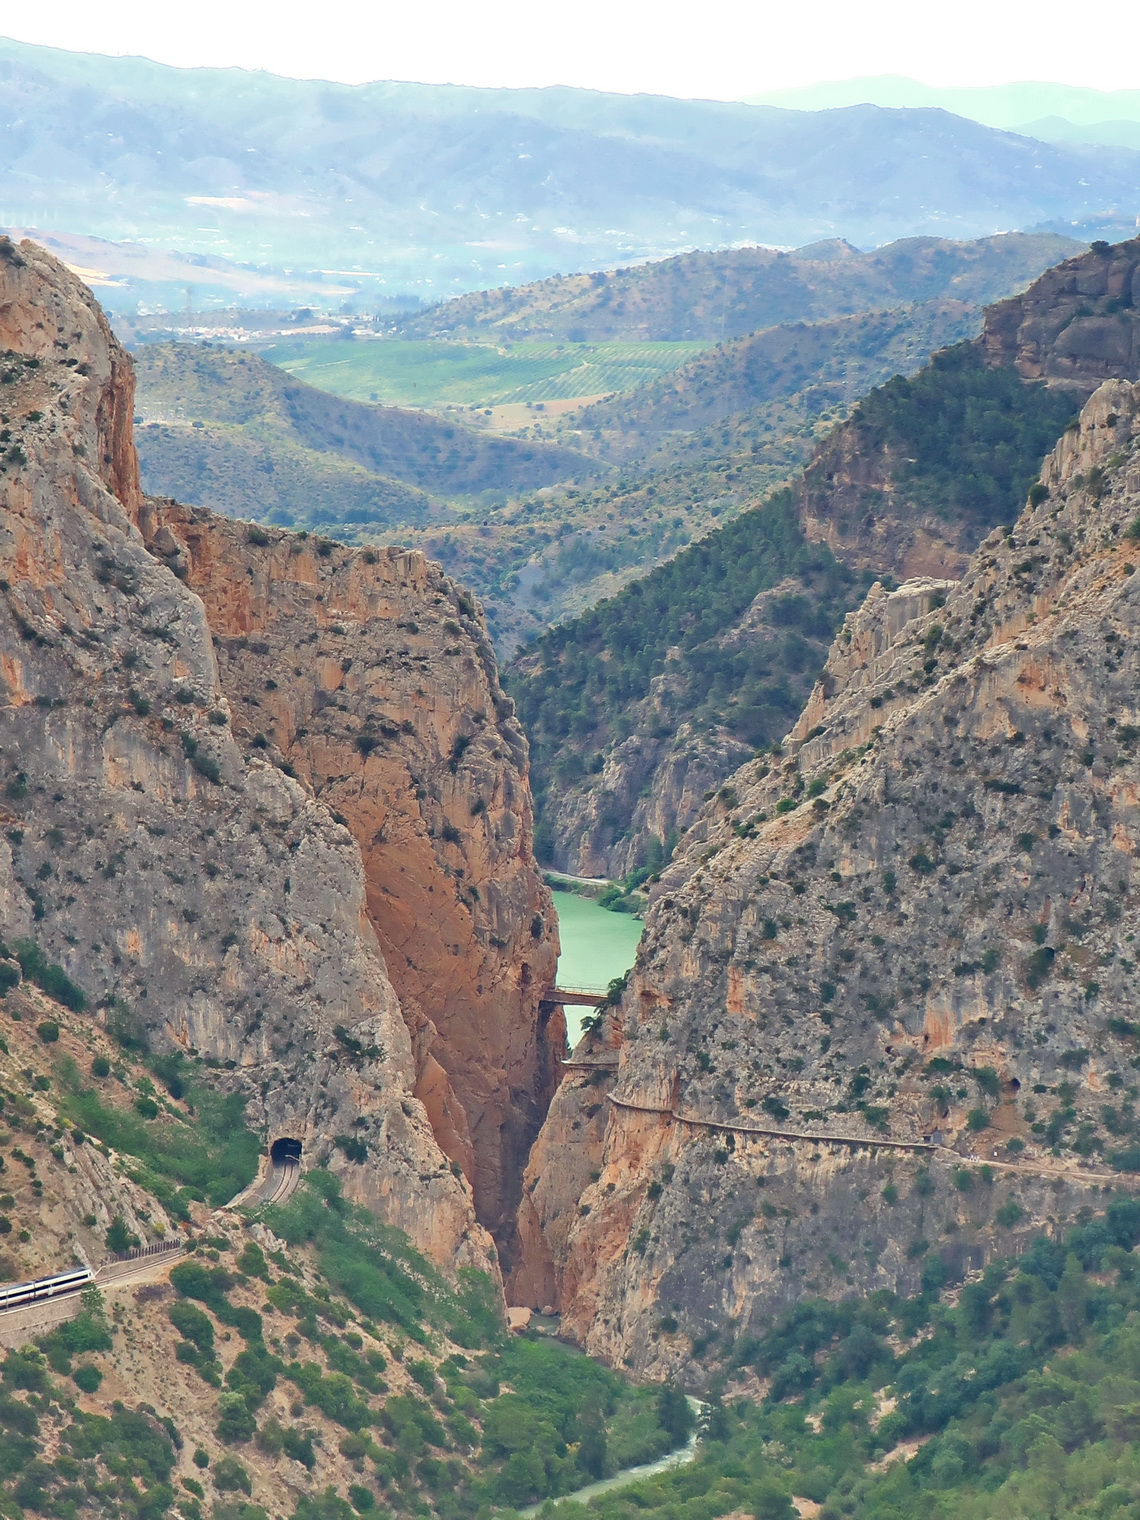 The southern part of the gorge of Caminito del Rey seen from the viewpoint Mirador de las Buitreras